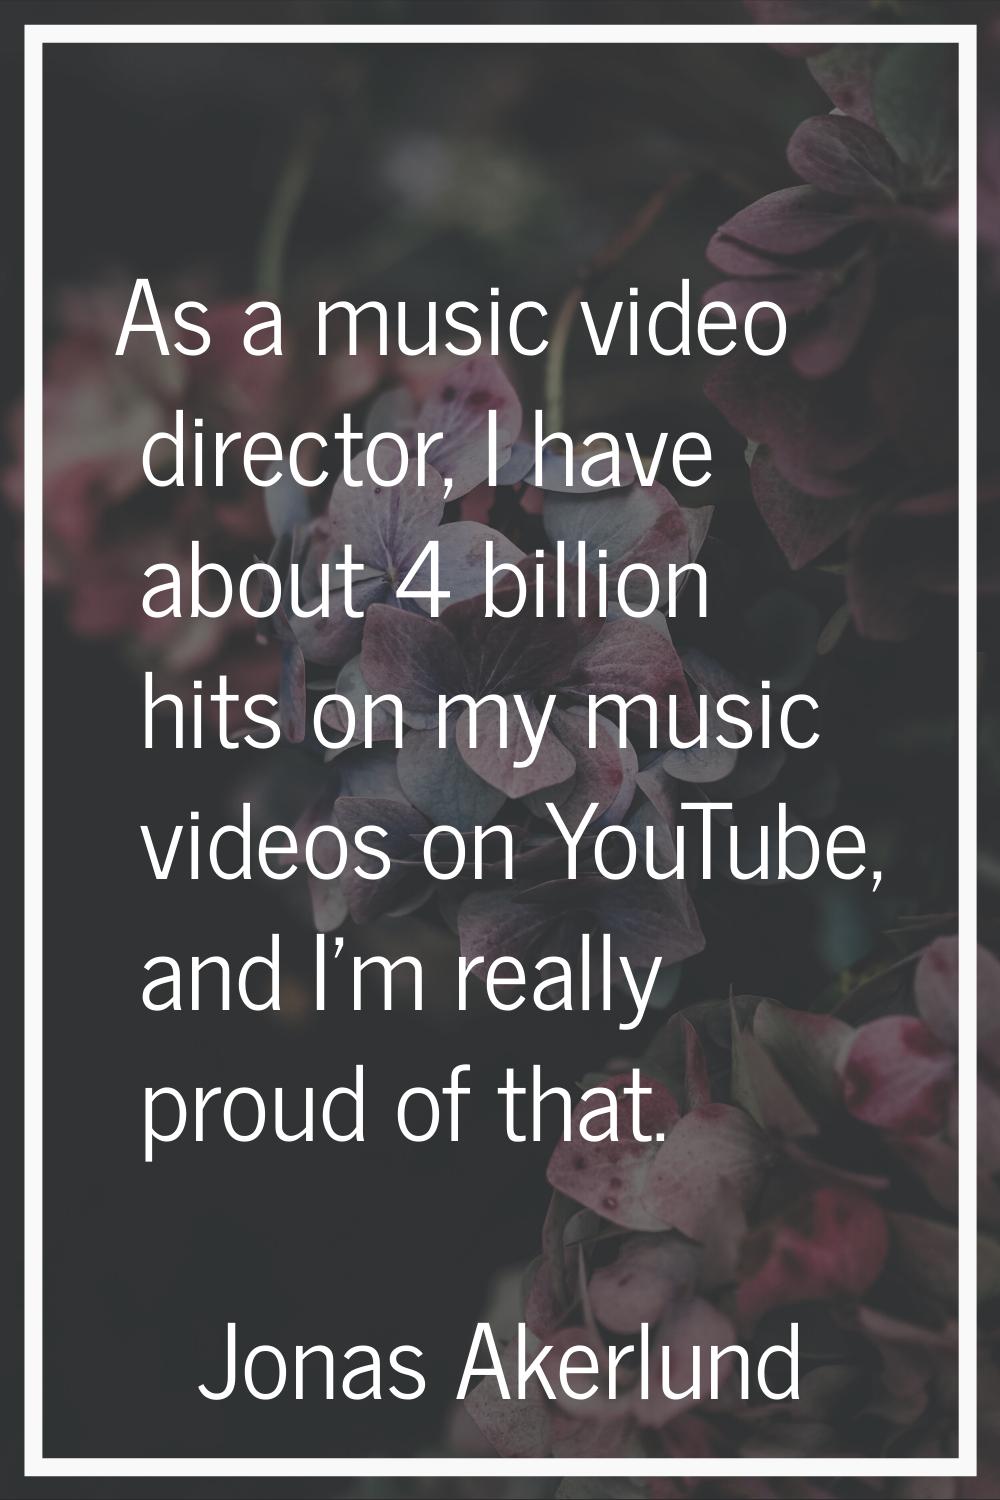 As a music video director, I have about 4 billion hits on my music videos on YouTube, and I’m reall